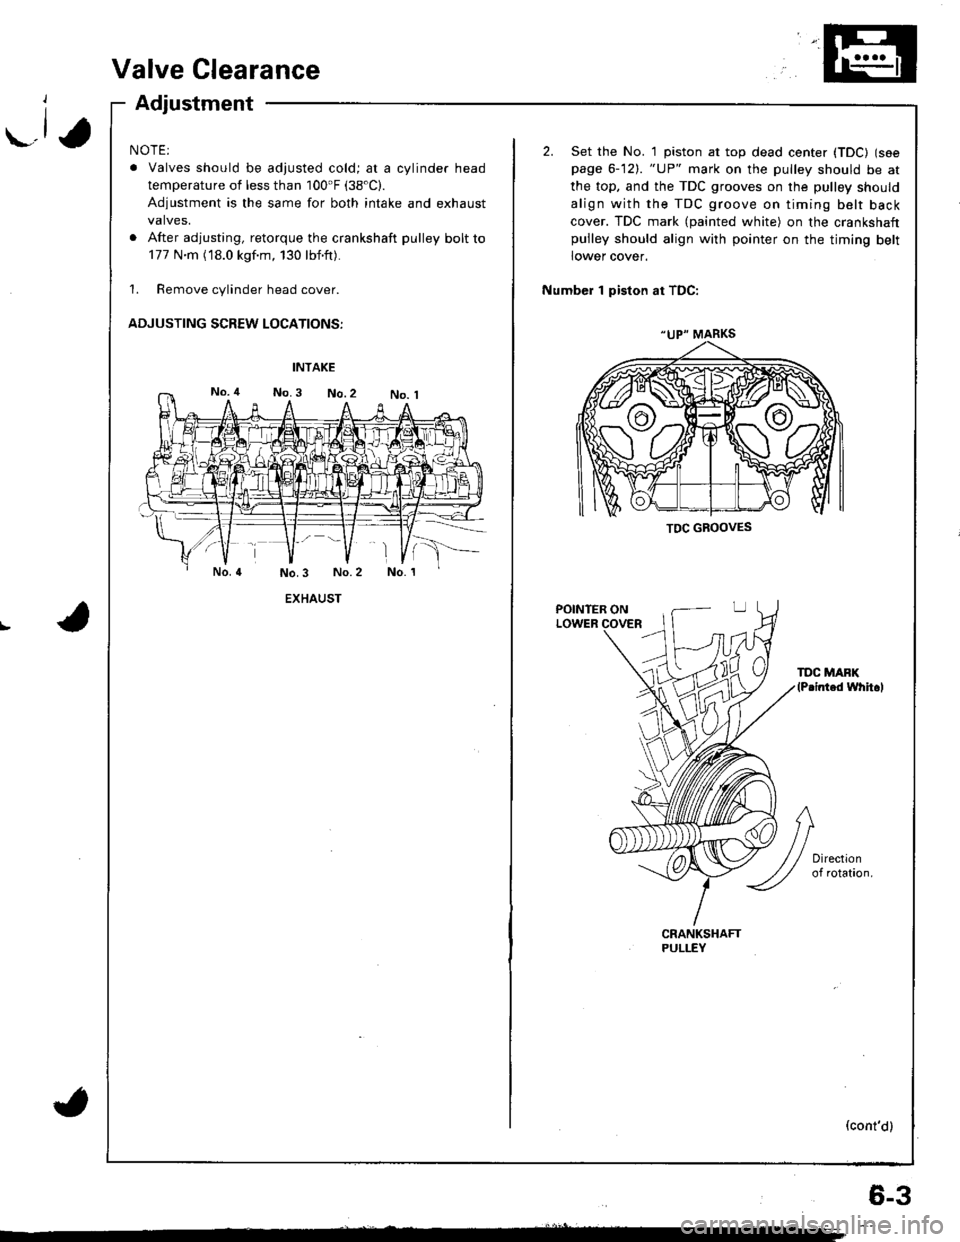 HONDA INTEGRA 1998 4.G Repair Manual r.lJ
Valve Clearance
Adjustment
NOTE:
. Valves should be adjusted cold; at a cylinder head
temperature of less than 100F (38"C).
Adjustment is the same for both intake and exhaust
valves.
. After adj